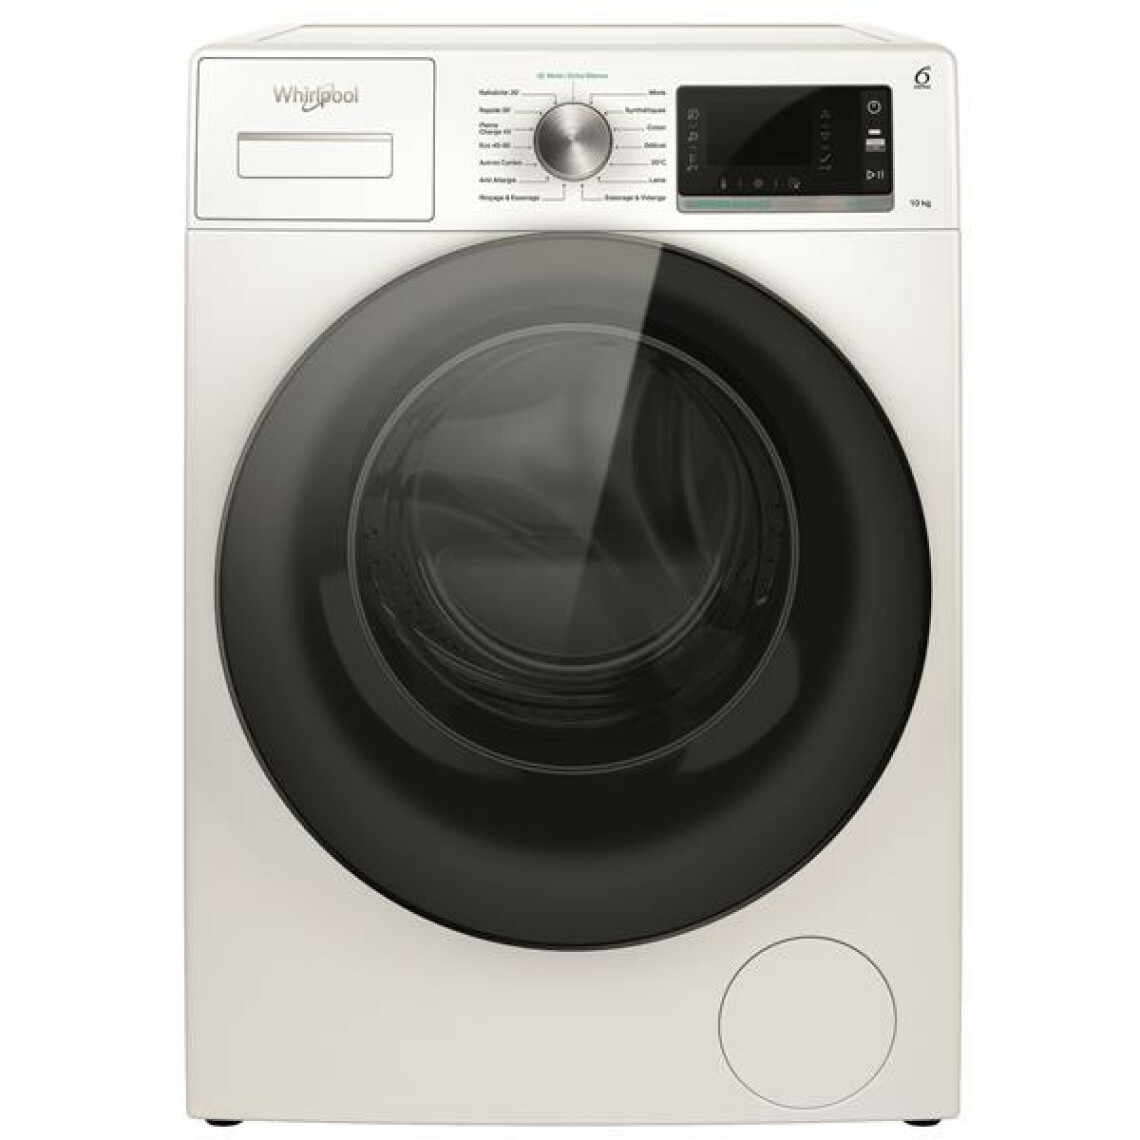 whirlpool - Lave linge Frontal W6W045WBFR - Lave-linge